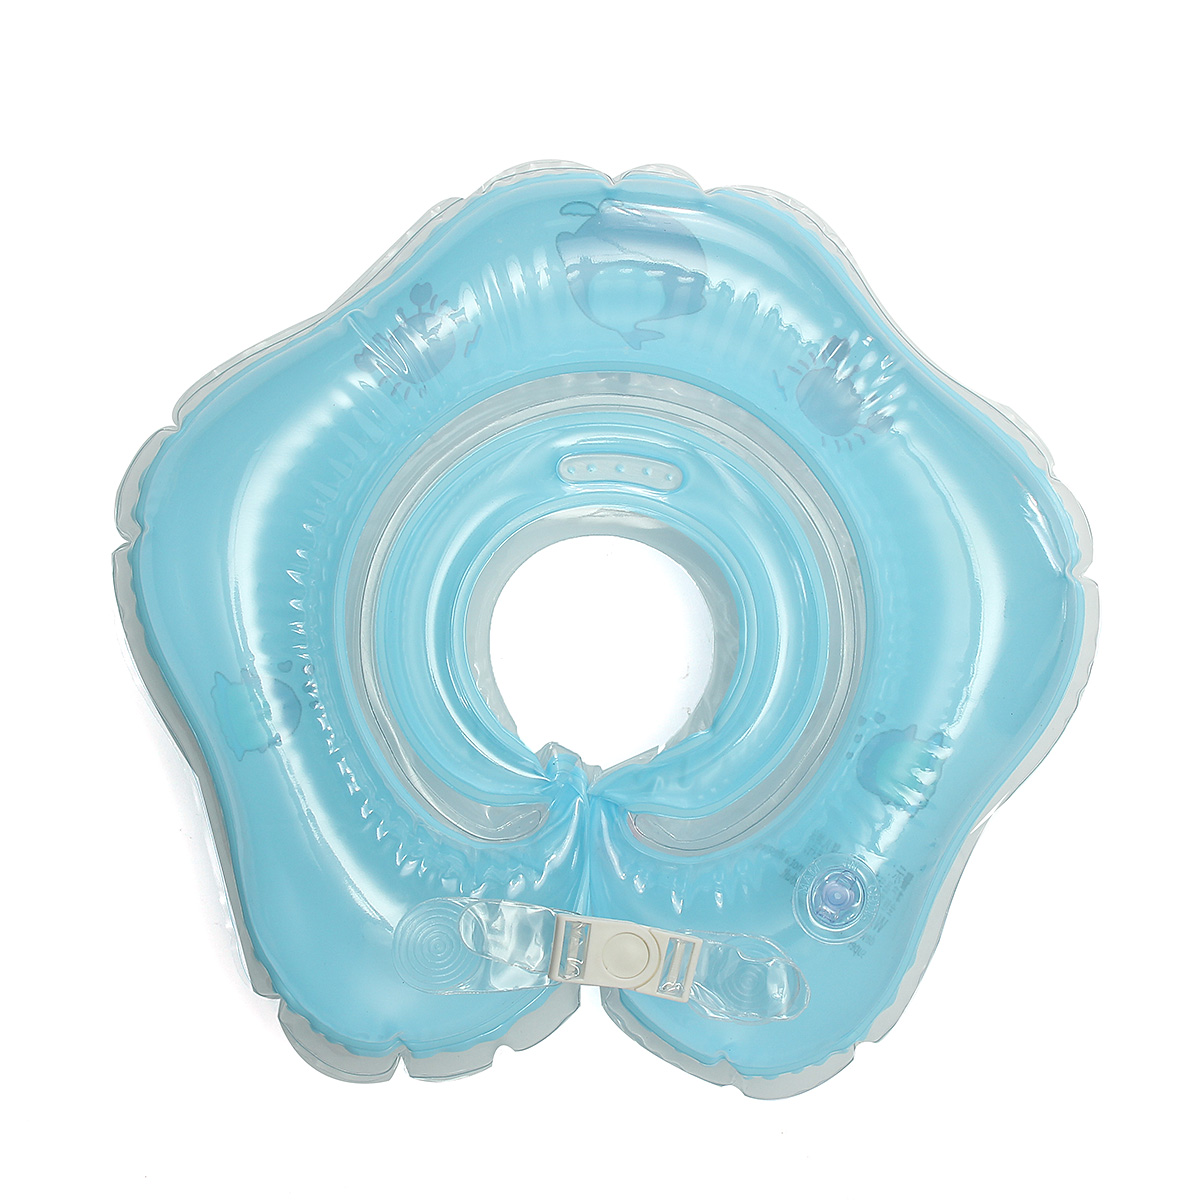 Baby-Infant-Swimming-Pool-Bath-Neck-Floating-Inflatable-Ring-Built-in-Belt-1169362-4